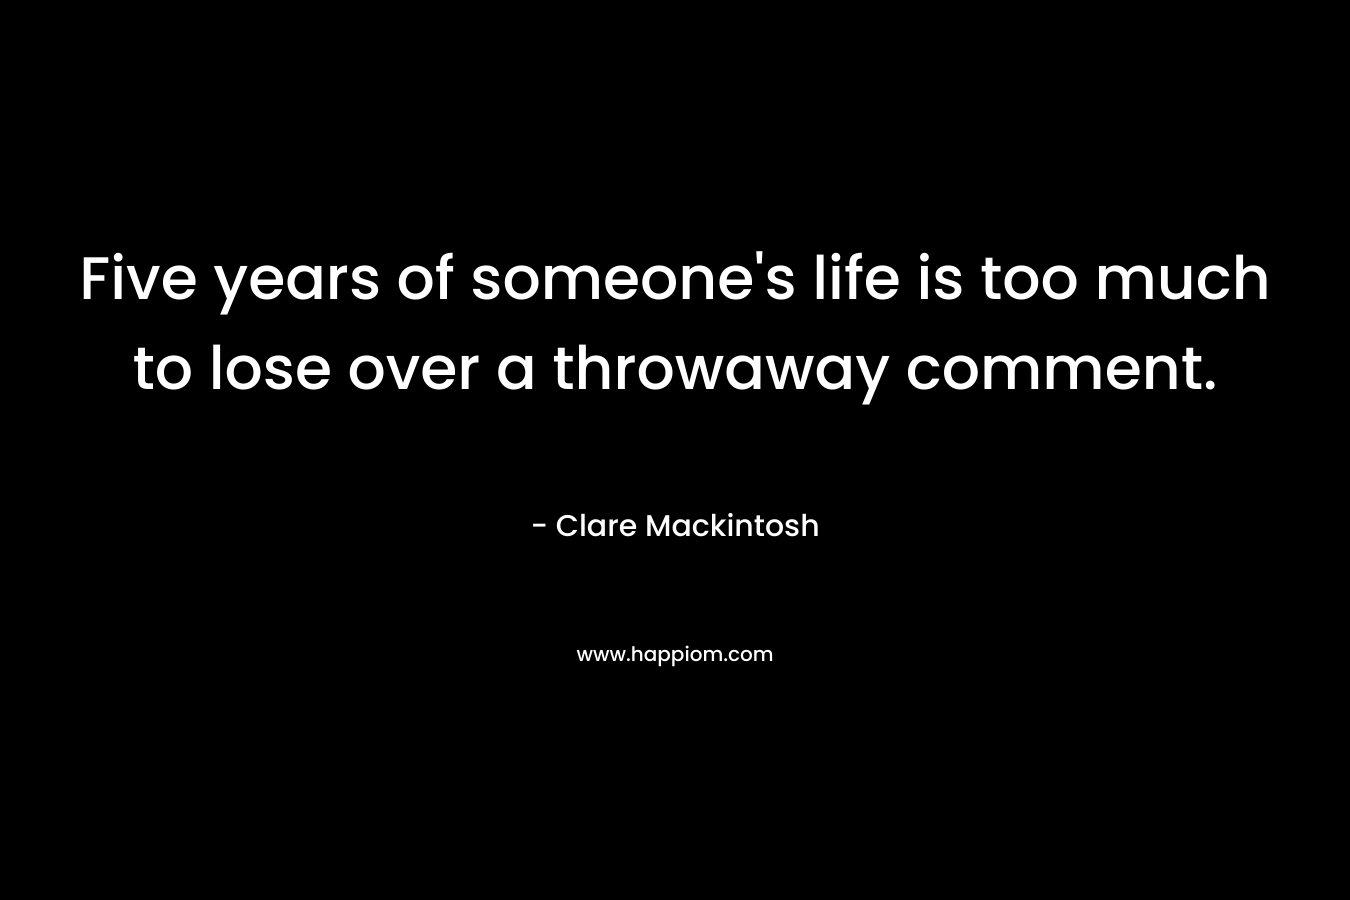 Five years of someone’s life is too much to lose over a throwaway comment. – Clare Mackintosh